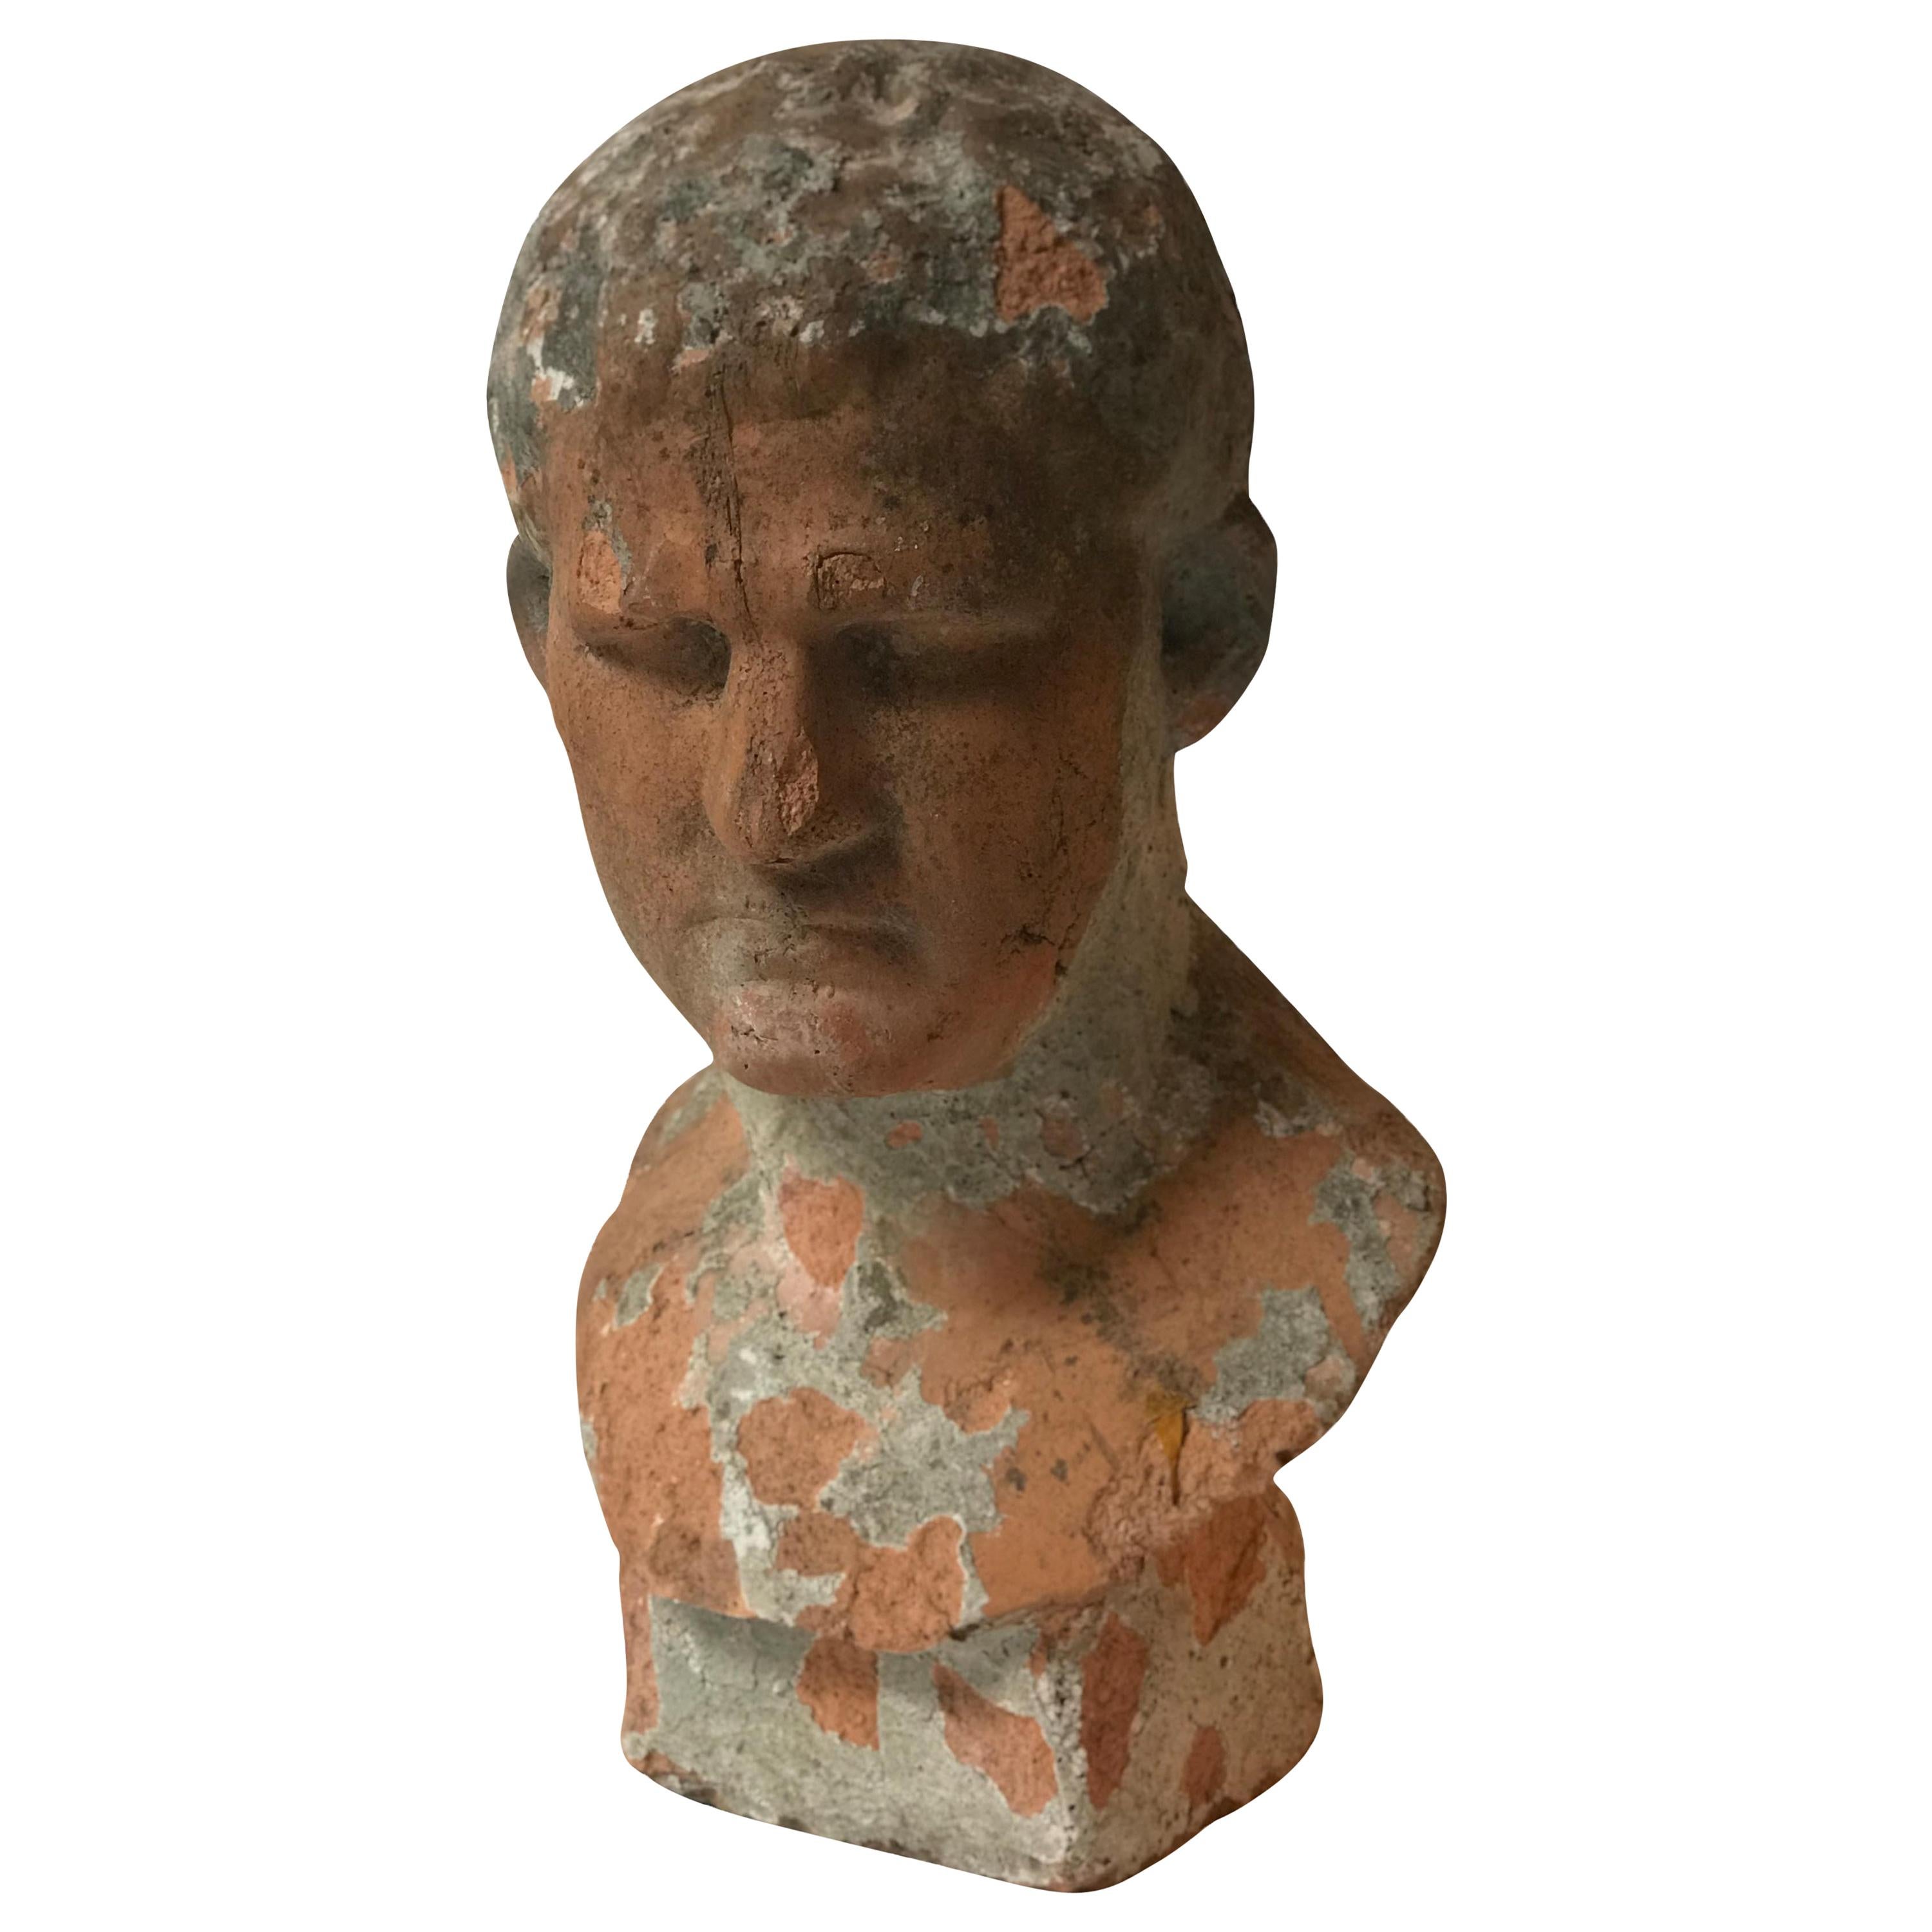 Terra Cotta Bust of Man with Cement Remnants from France